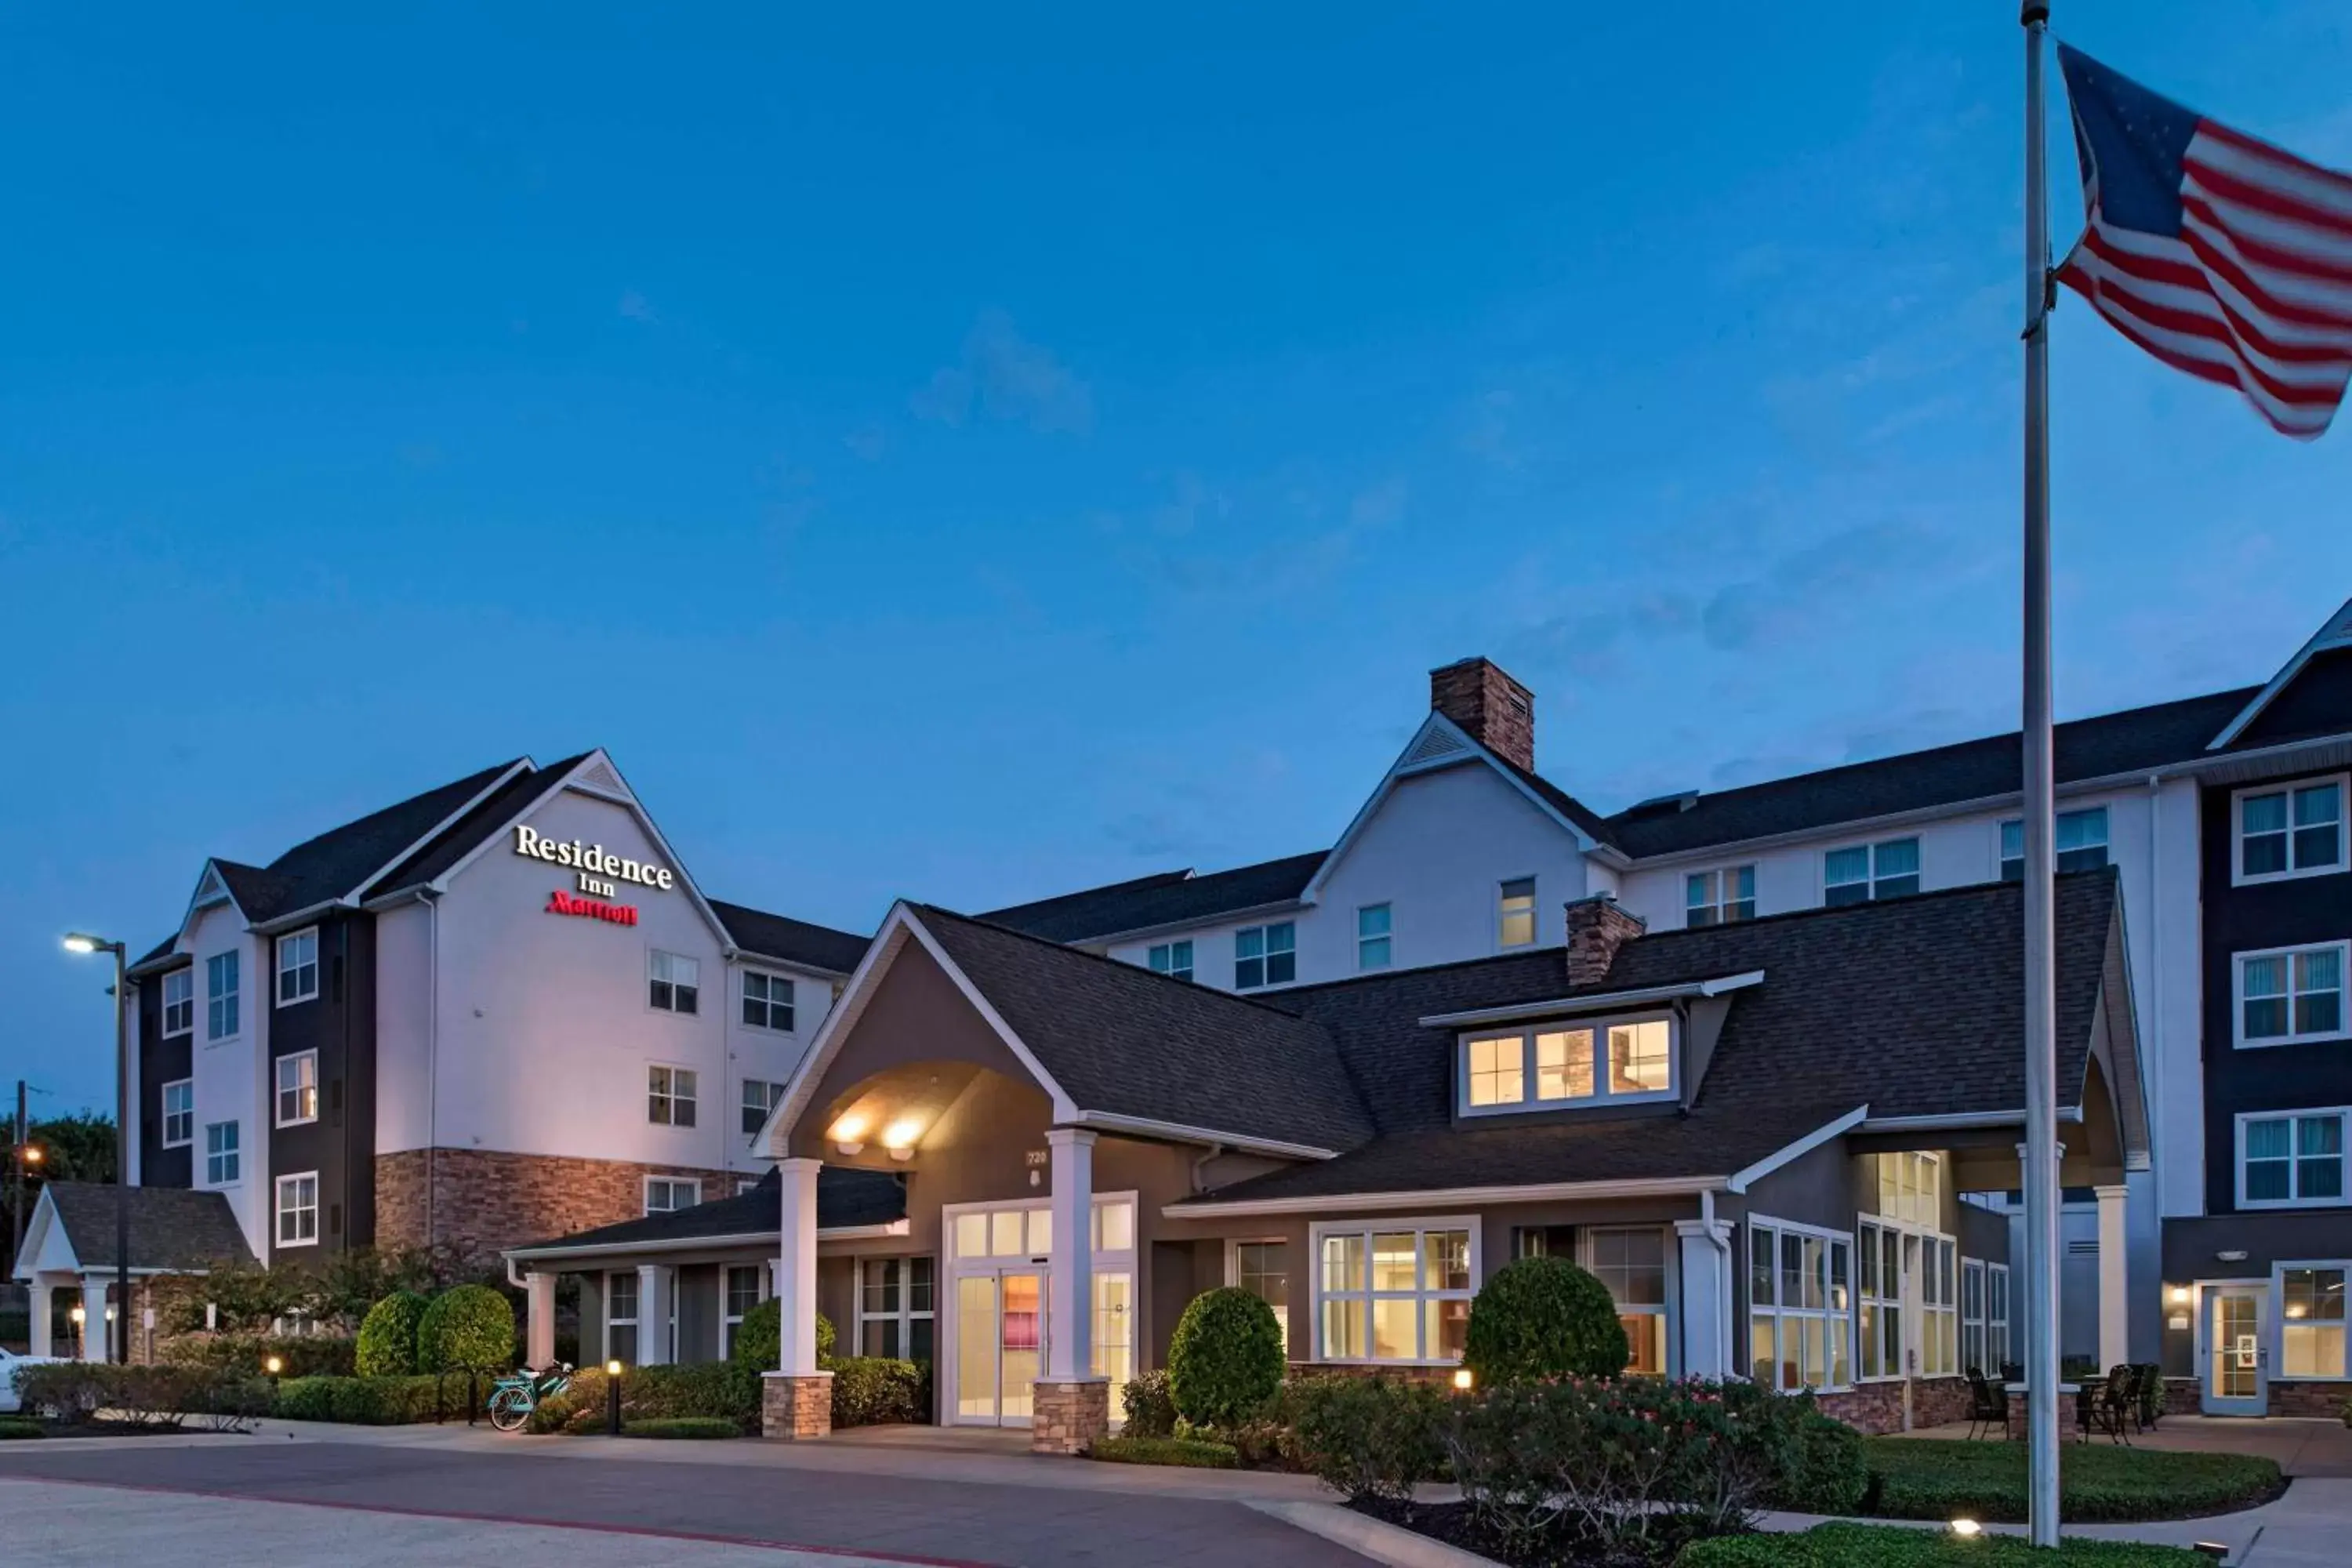 Property Building in Residence Inn Bryan College Station